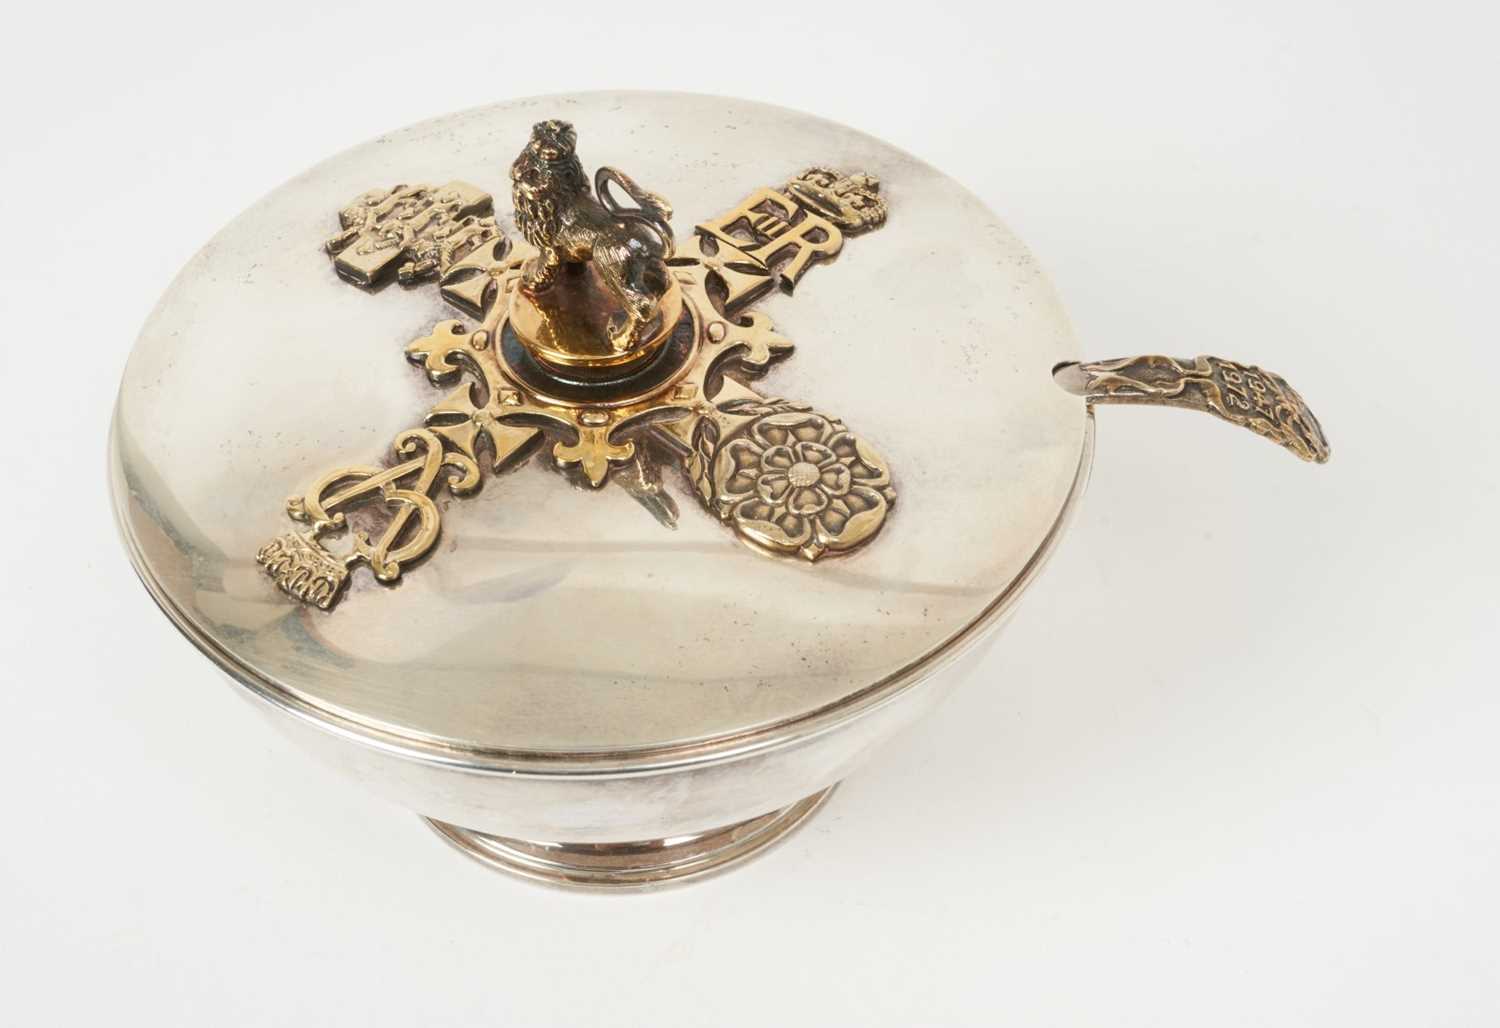 Lot 136 - Fine quality Asprey silver sugar bowl and cover with matching sifter spoon, made to commemorate the 25th Wedding Anniversary of H.M. The Queen and H.R.H. The Prince Philip